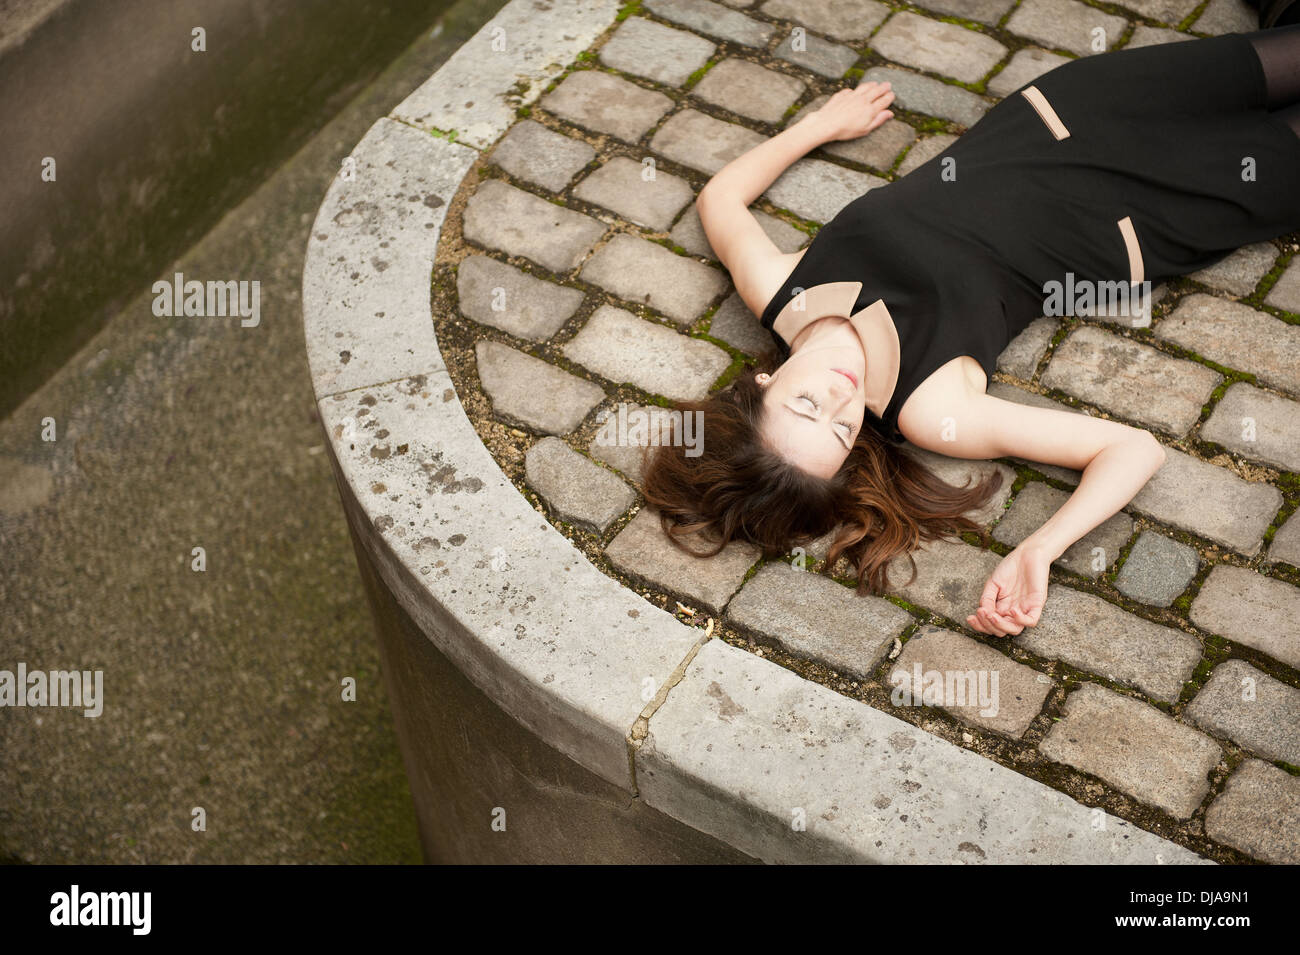 Elevated view of a woman wearing a black dress and lying down (dead?) on a cobbled road. Stock Photo